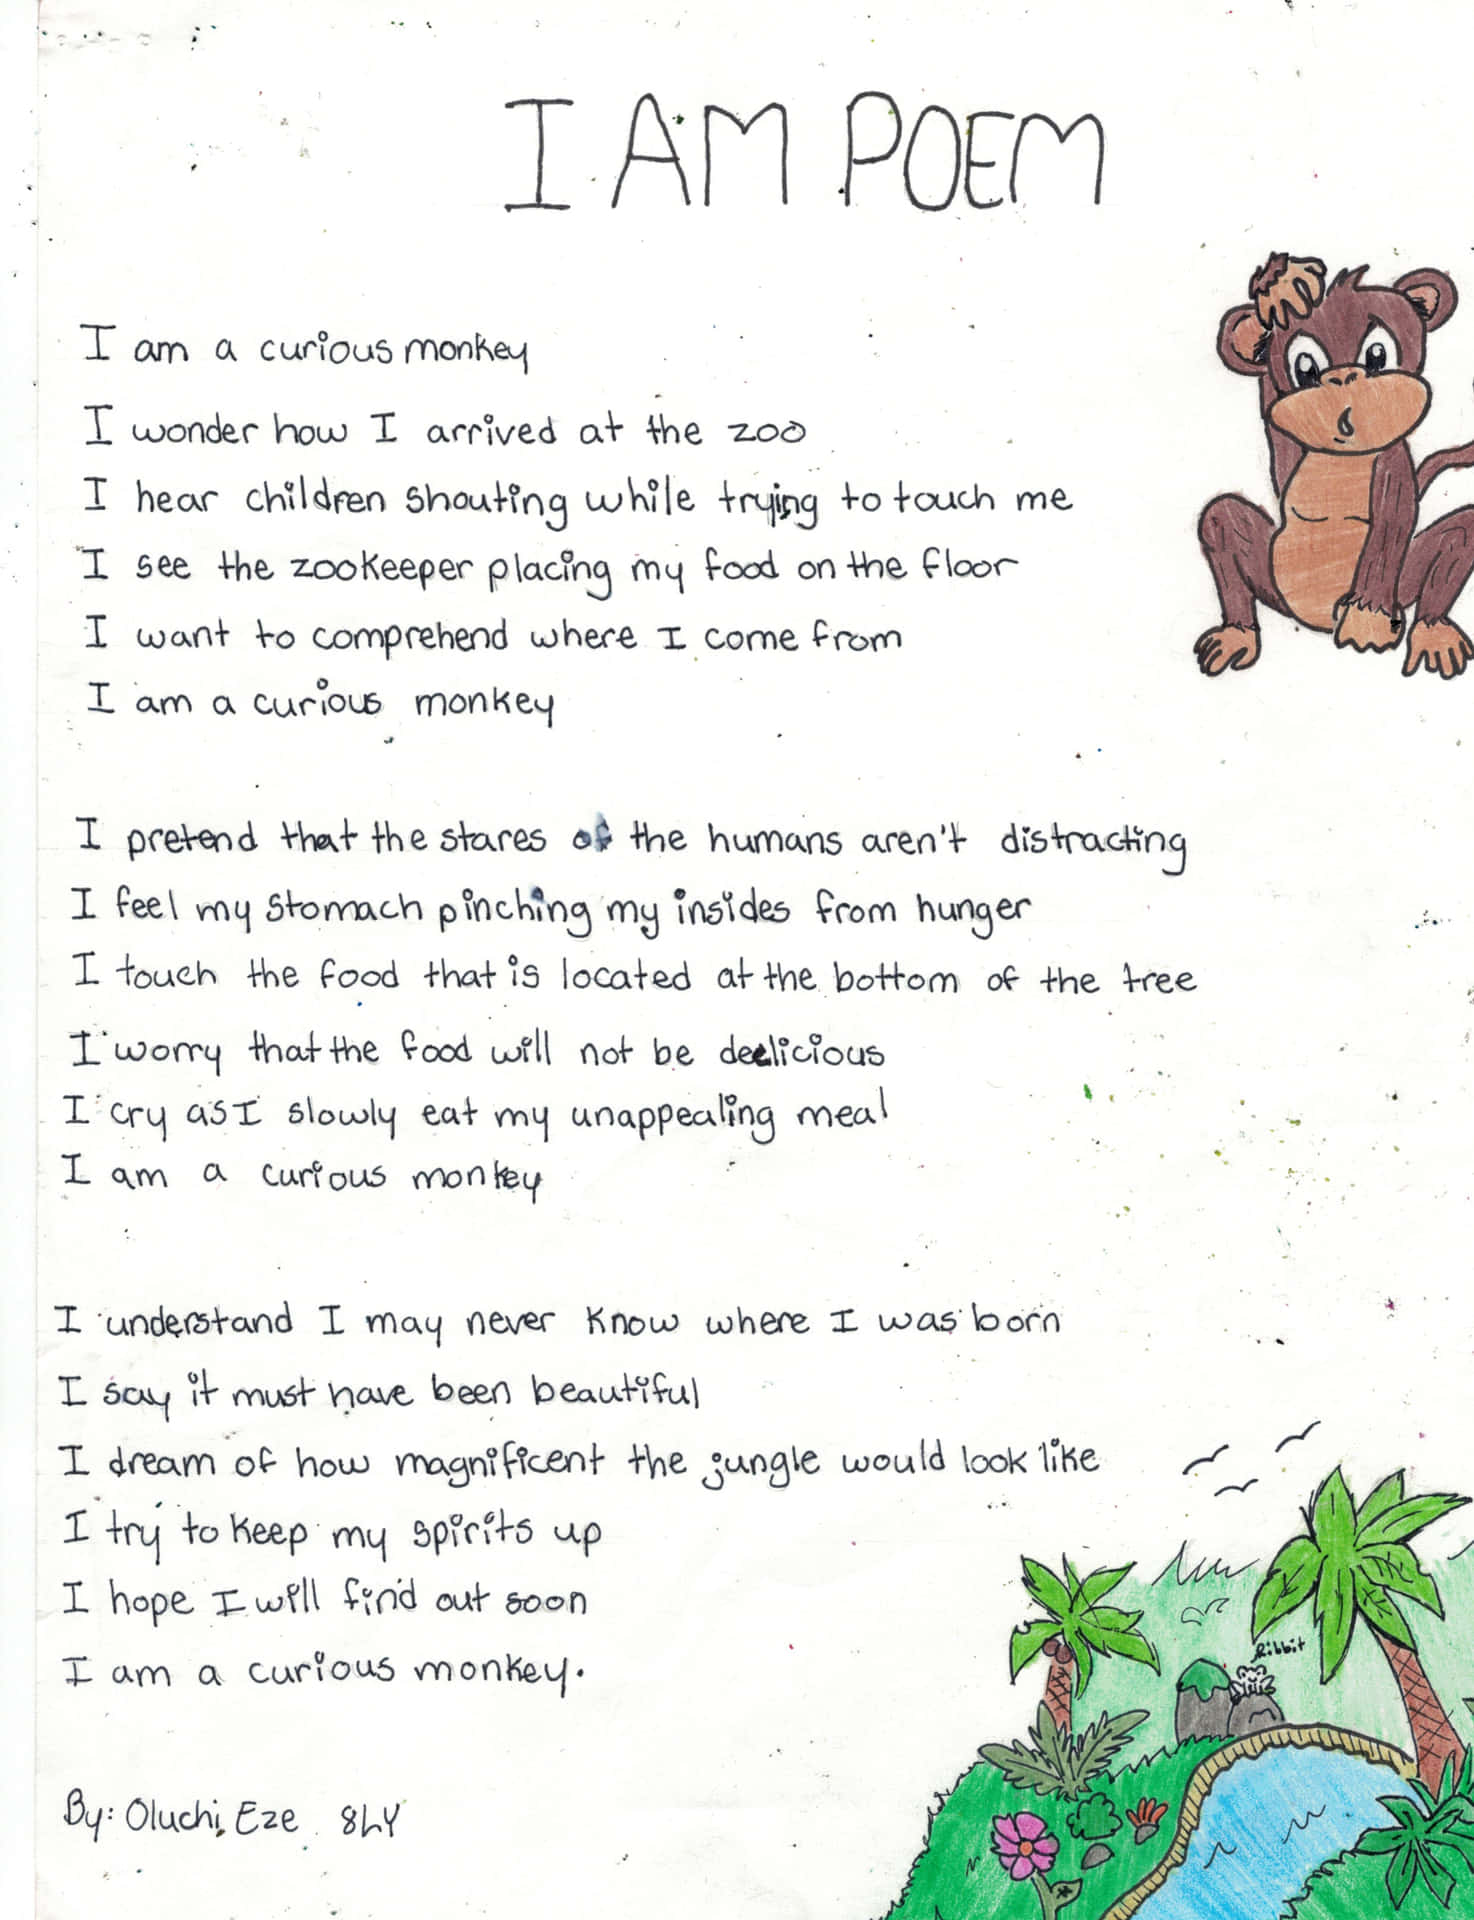 A Poem Written By A Child With A Monkey